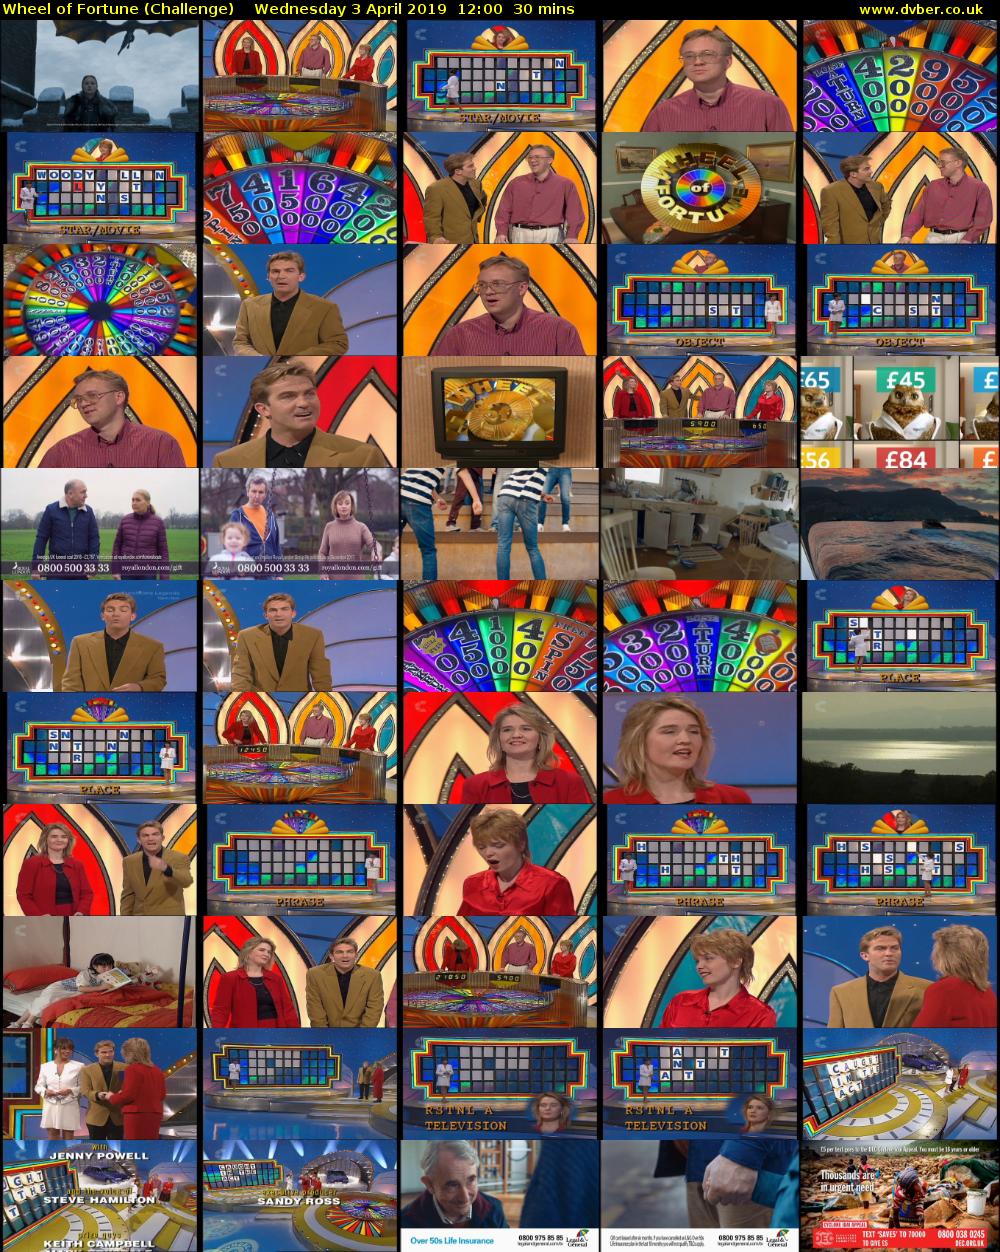 Wheel of Fortune (Challenge) Wednesday 3 April 2019 12:00 - 12:30